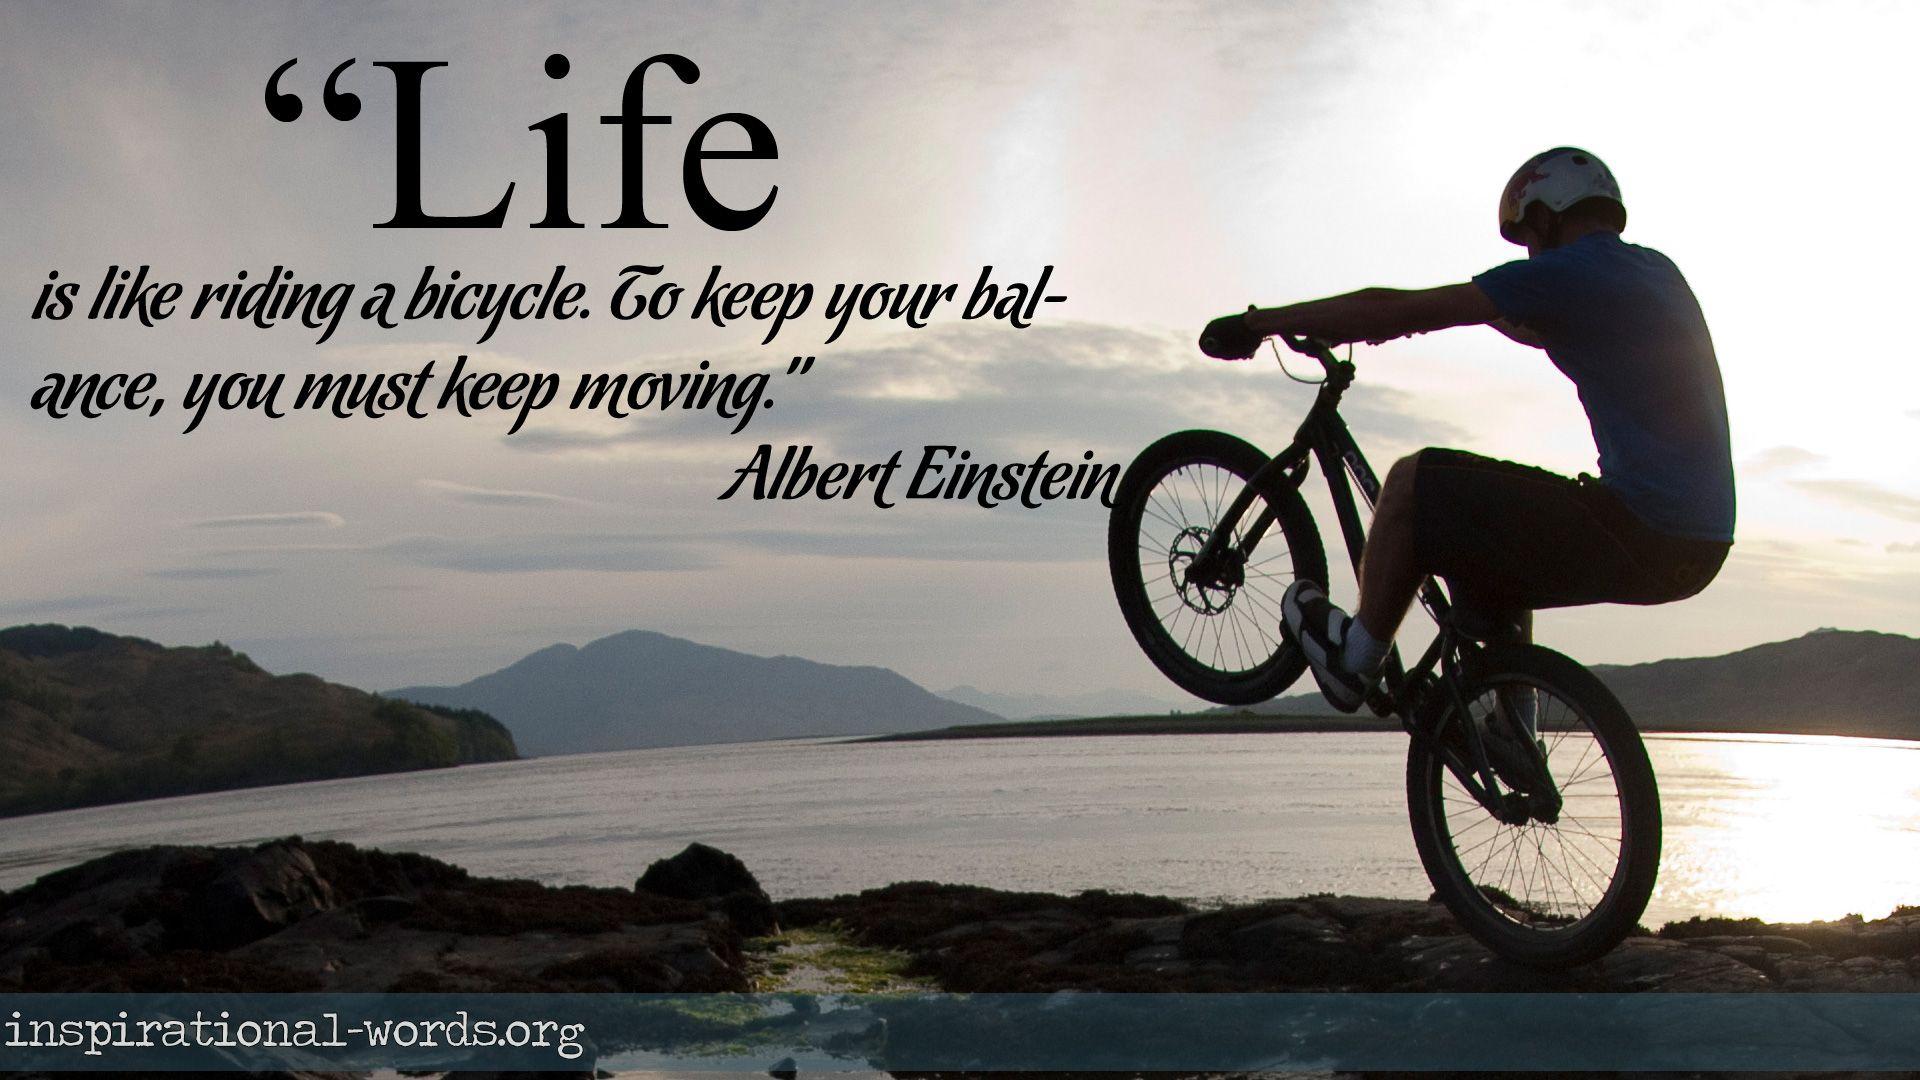 Inspirational Wallpaper Quote by Albert Einstein “Life is like riding a bicycle. To keep your balance, y. Funny quotes for instagram, Biker quotes, Bicycle quotes